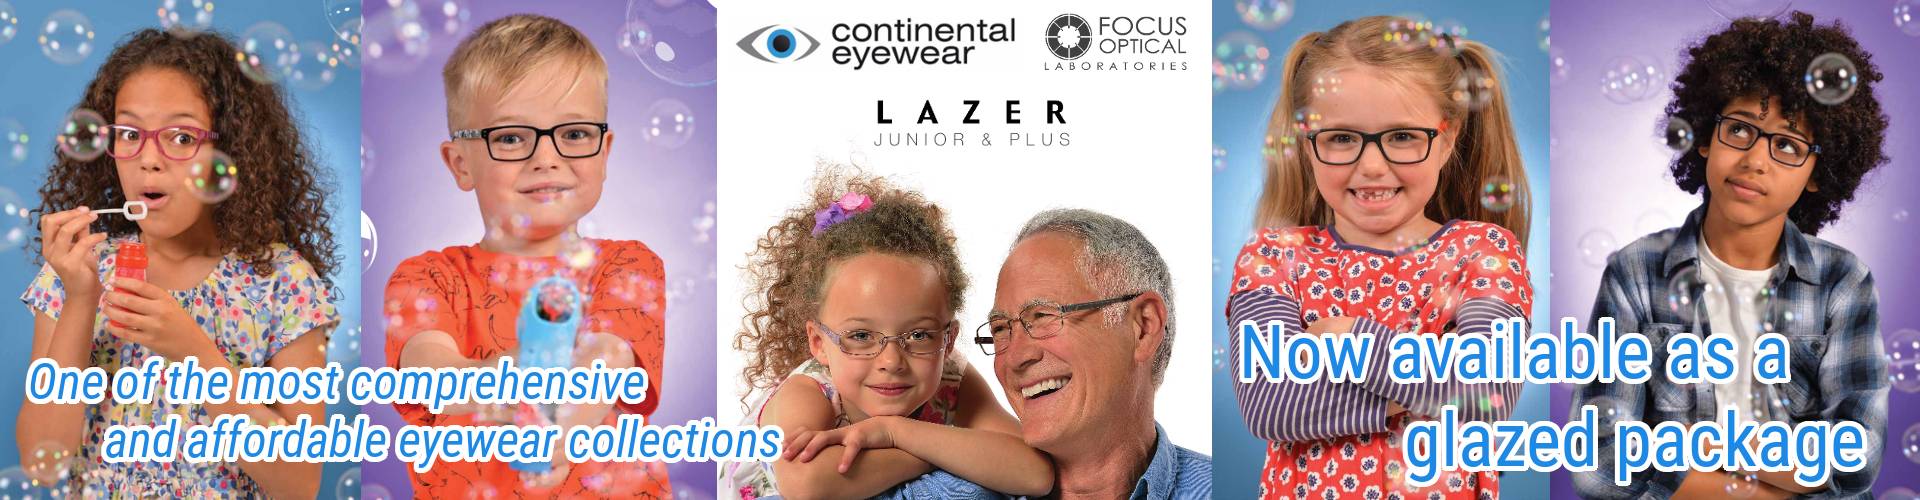 Lazer eyewear collection available as a glazed package from Focus Optical